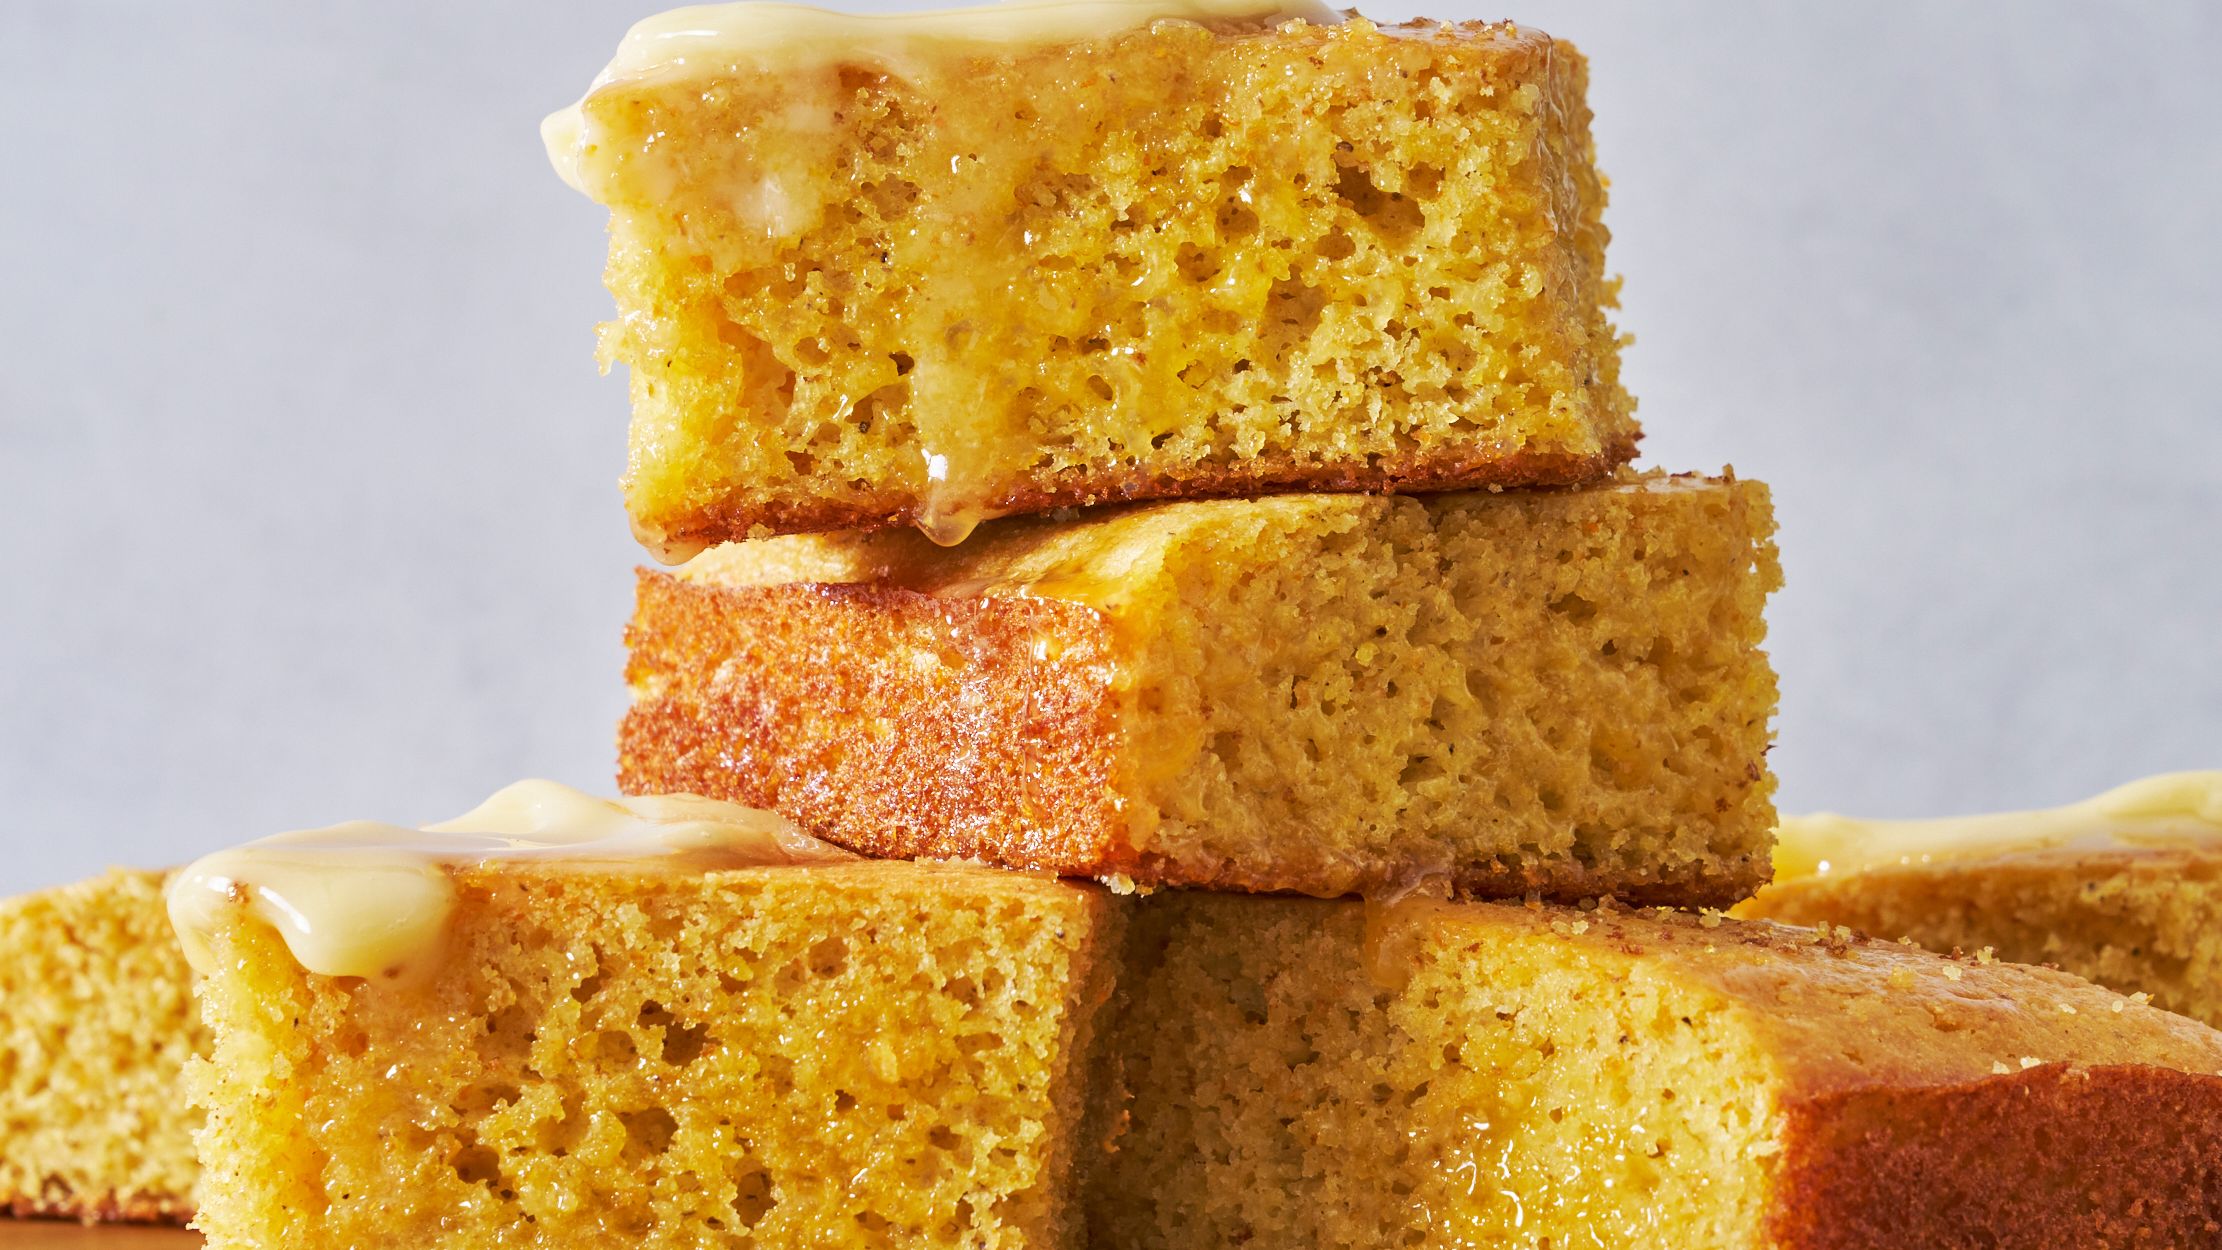 Simple Skillet Cornbread - Breads and Sweets